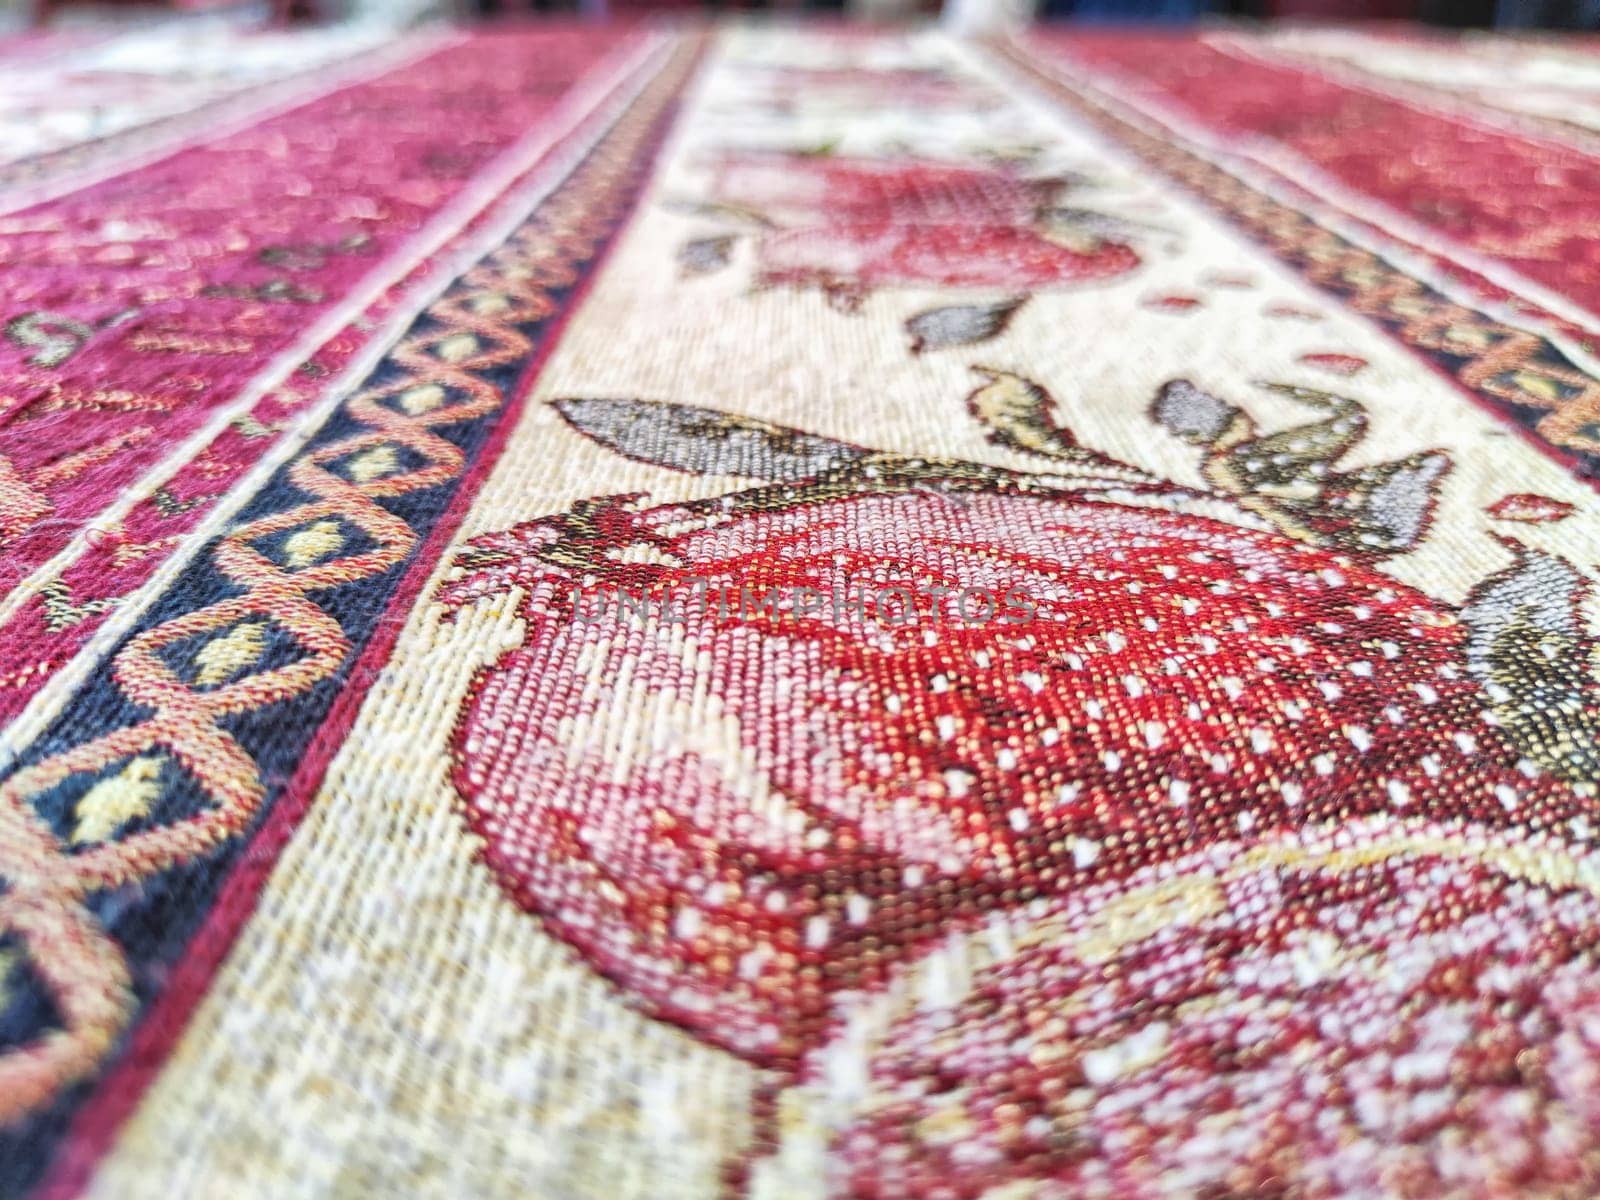 A tablecloth on the table or a carpet on the floor. Background, texture. Detailed texture of a patterned fabric surface